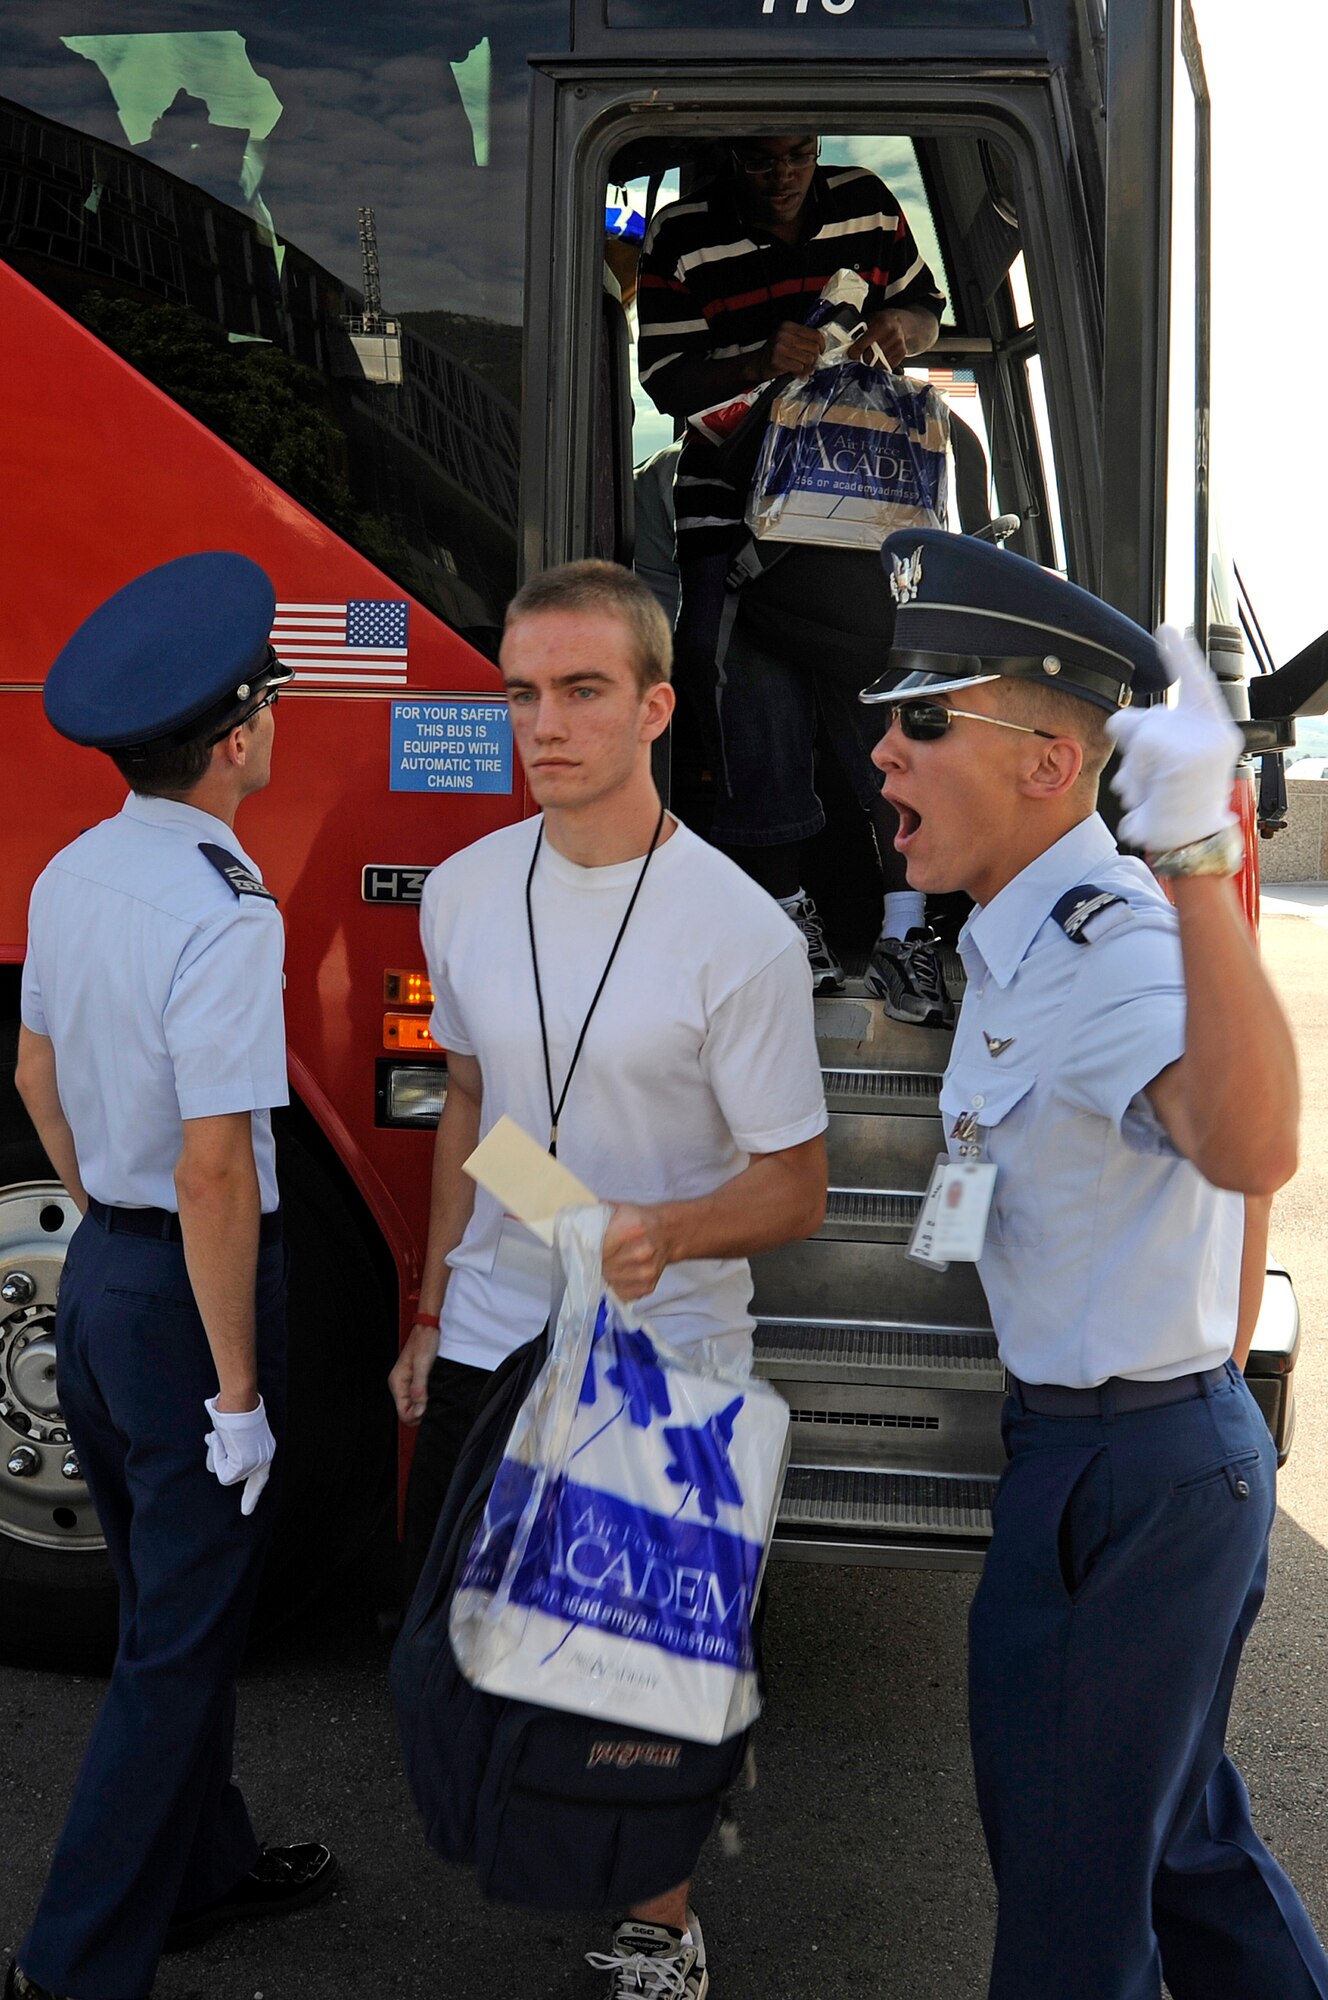 Cadet cadre shout, "Get off my bus!" at basic cadets as they exit near the Core Values Ramp at the U.S. Air Force Academy in Colorado Springs, Colo., June 25 for cadet inprocessing. (U.S. Air Force photo/Mike Kaplan)